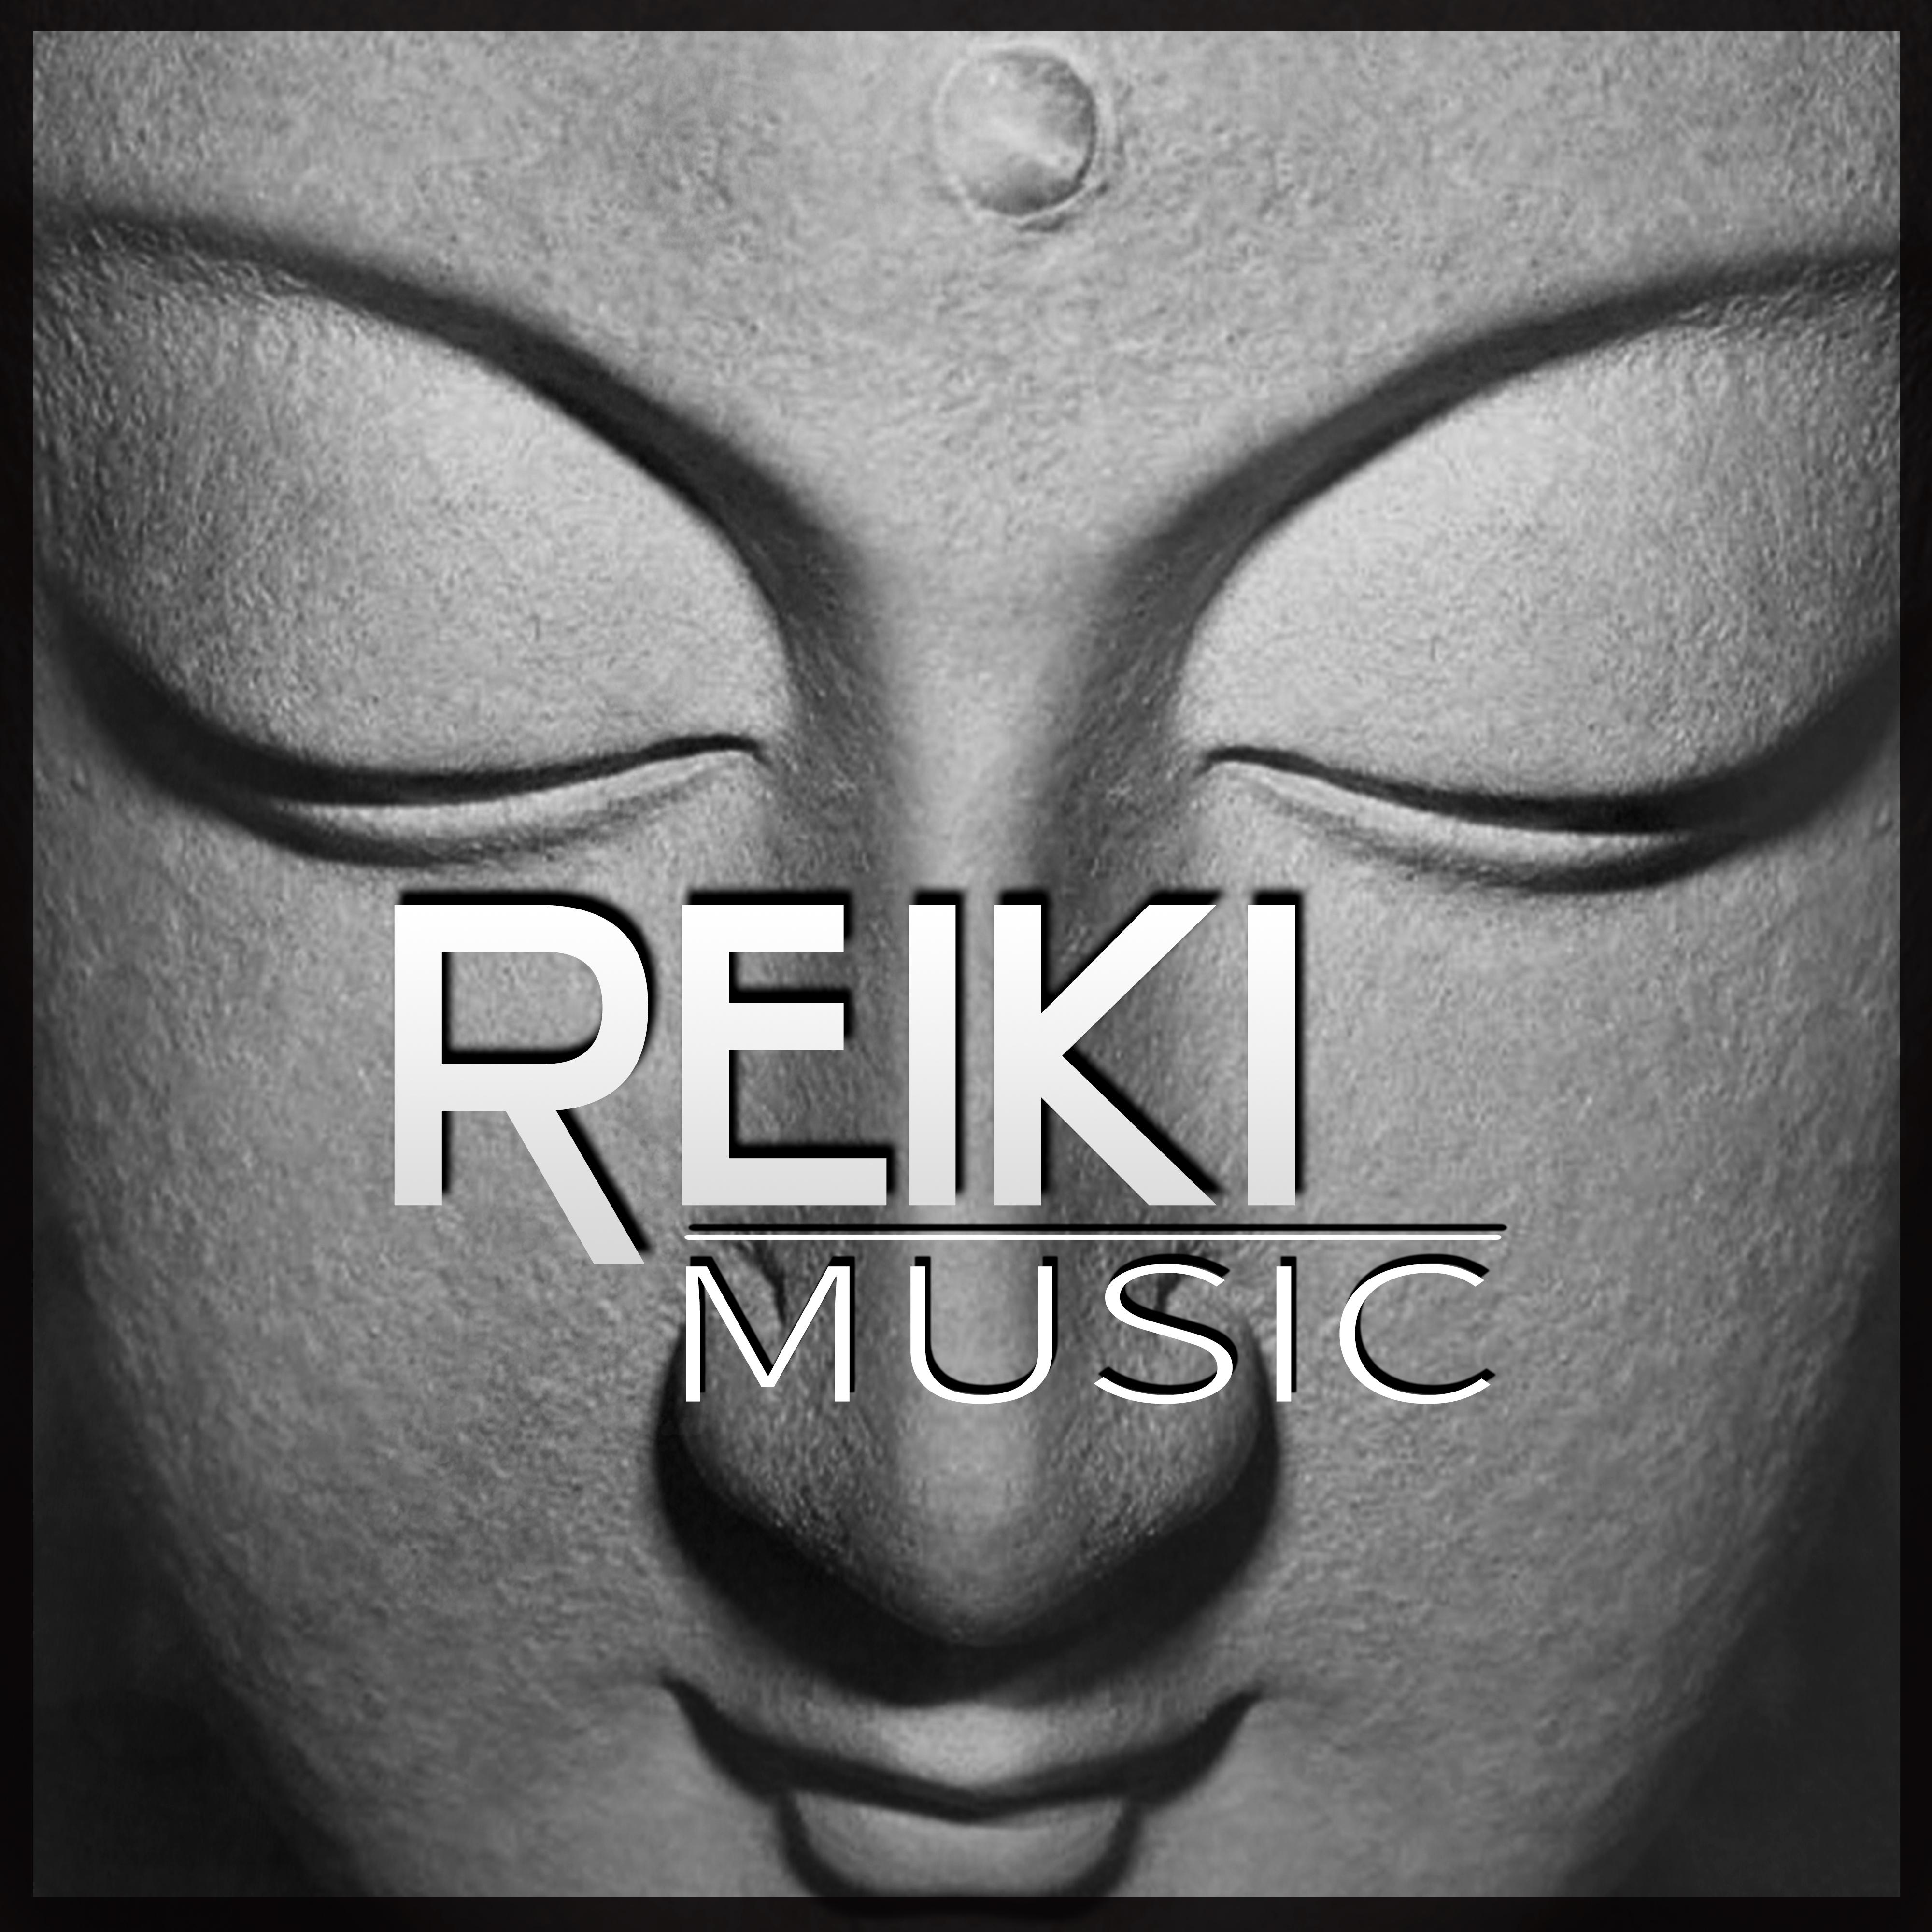 Reiki Music: Sound Therapy Relaxation Meditation, Calm Your Emotions, Healing New Age Songs for Massage, Energy Balance